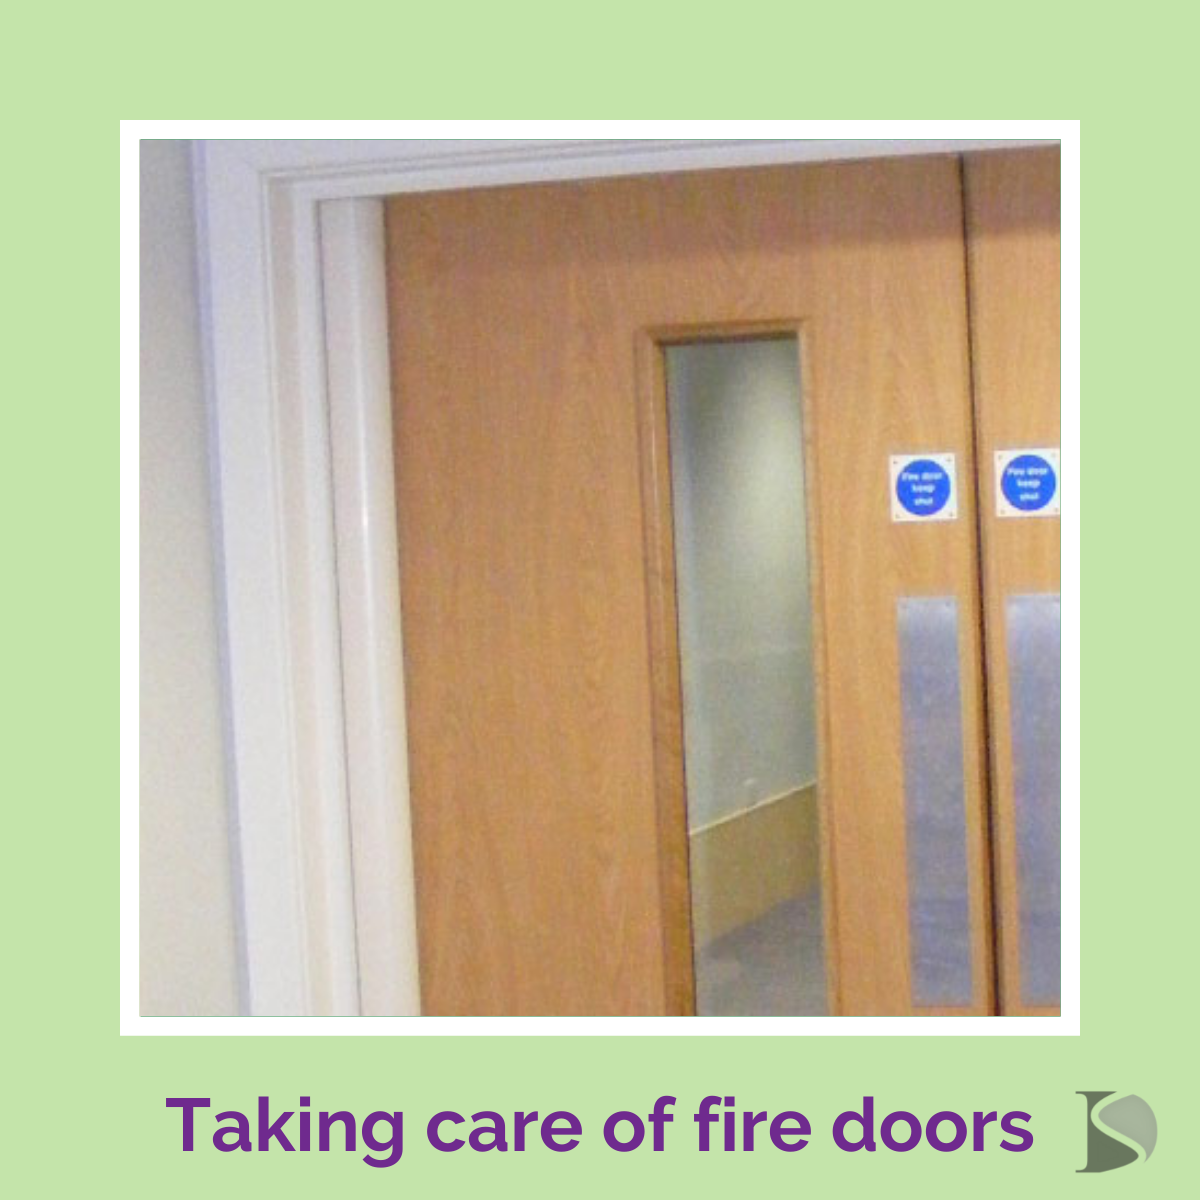 Title image for article taking care of fire doors